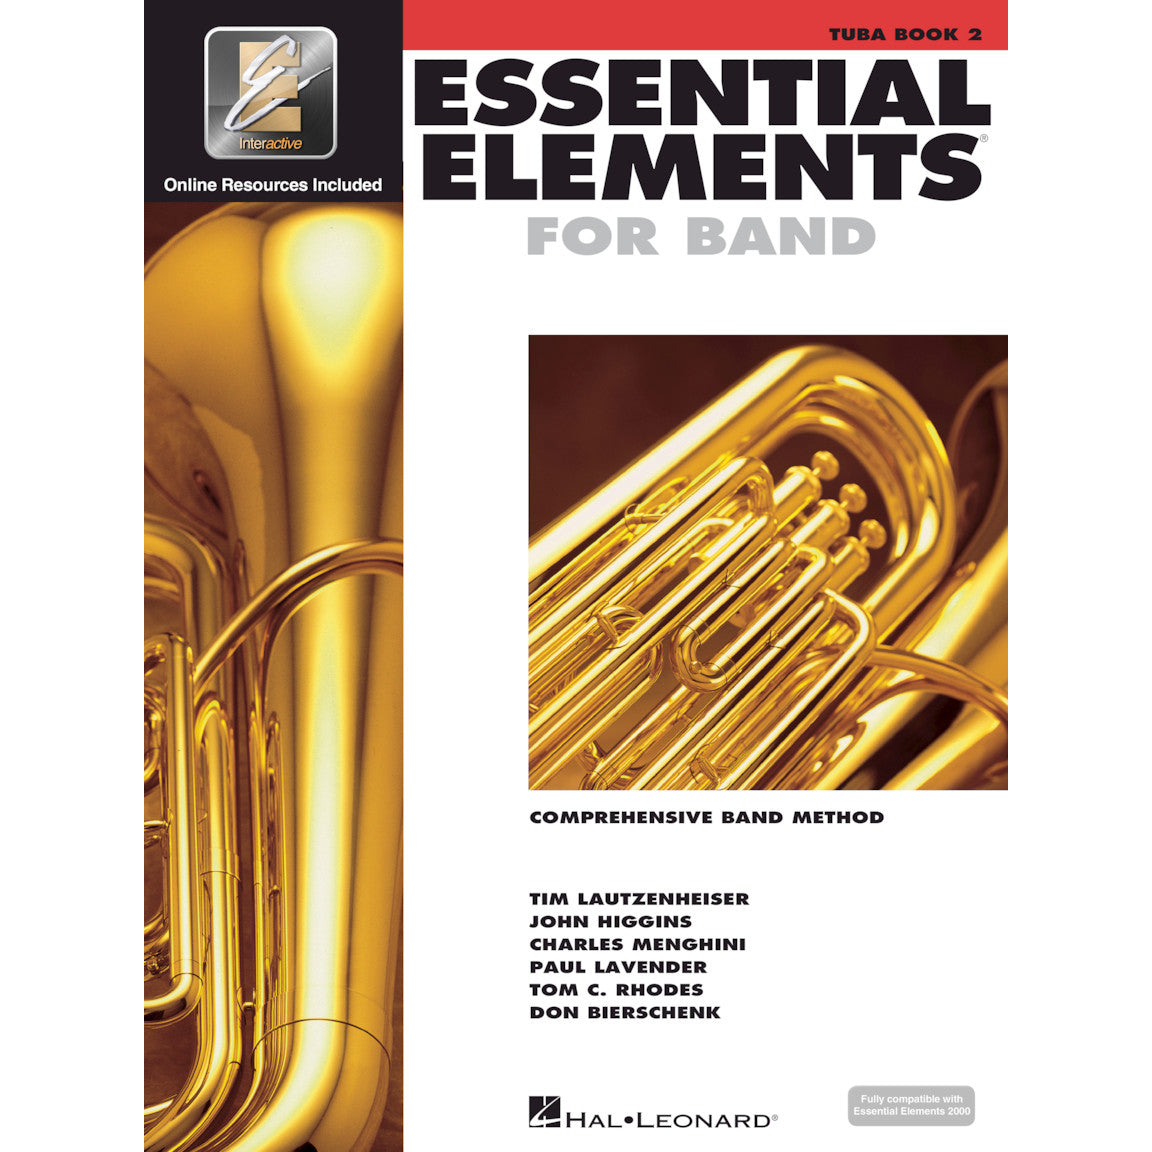 Essential Elements for Band Tuba Book 2